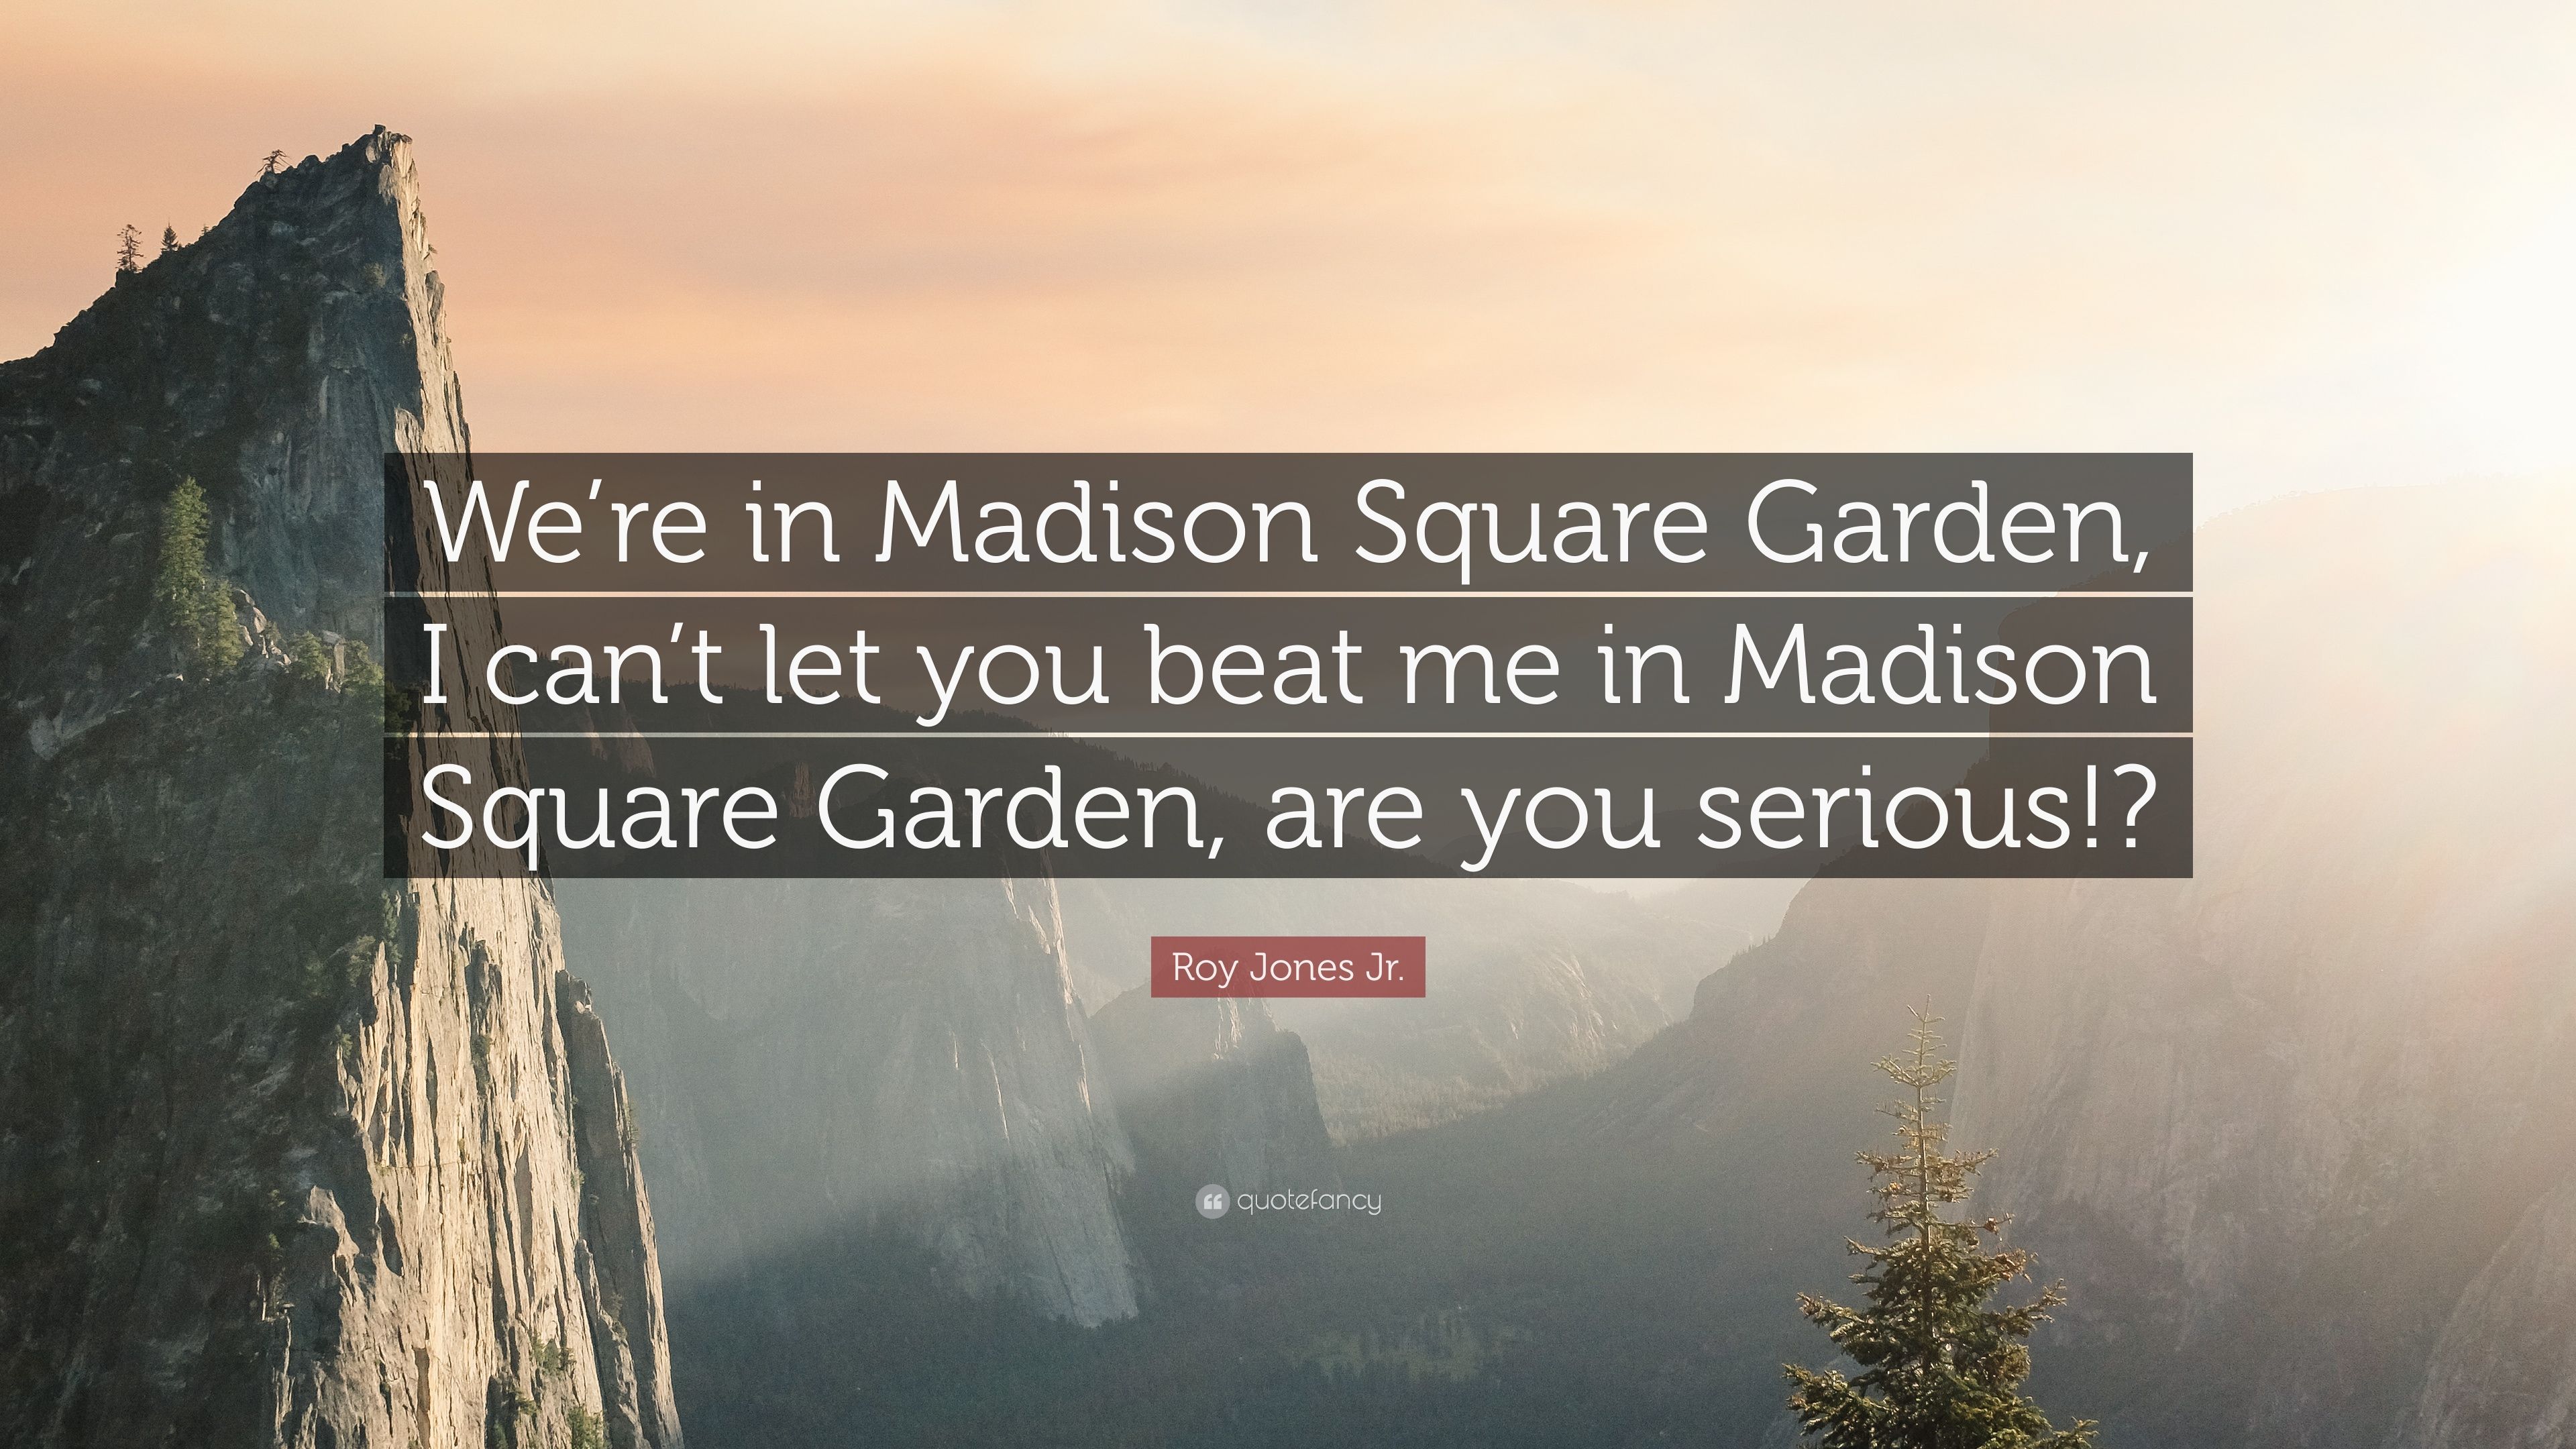 Roy Jones Jr. Quote: “We're in Madison Square Garden, I can't let